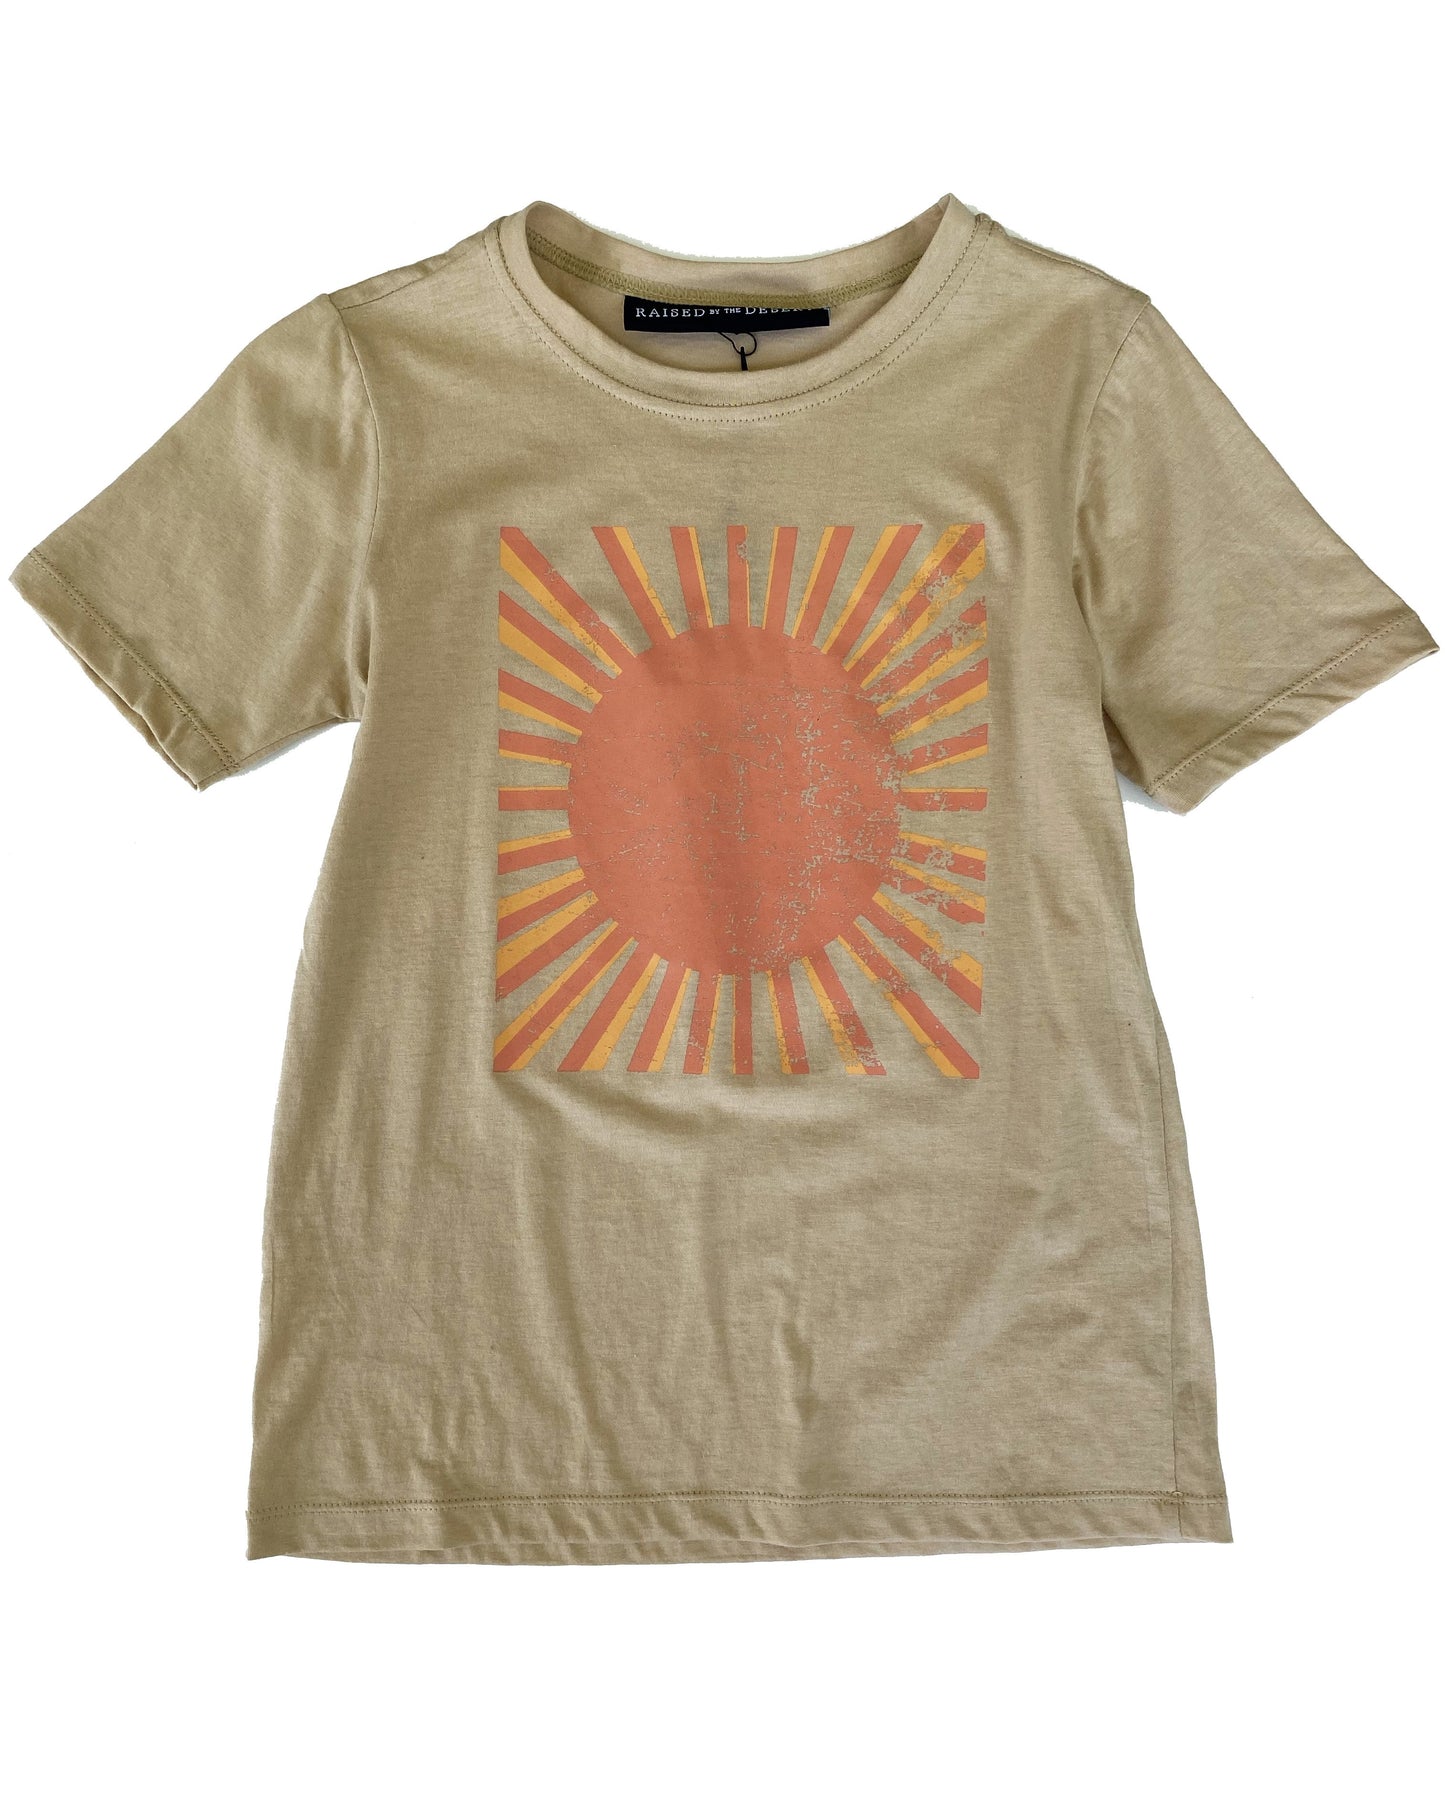 Lewis T-Shirt - Canvsa Southern Sun